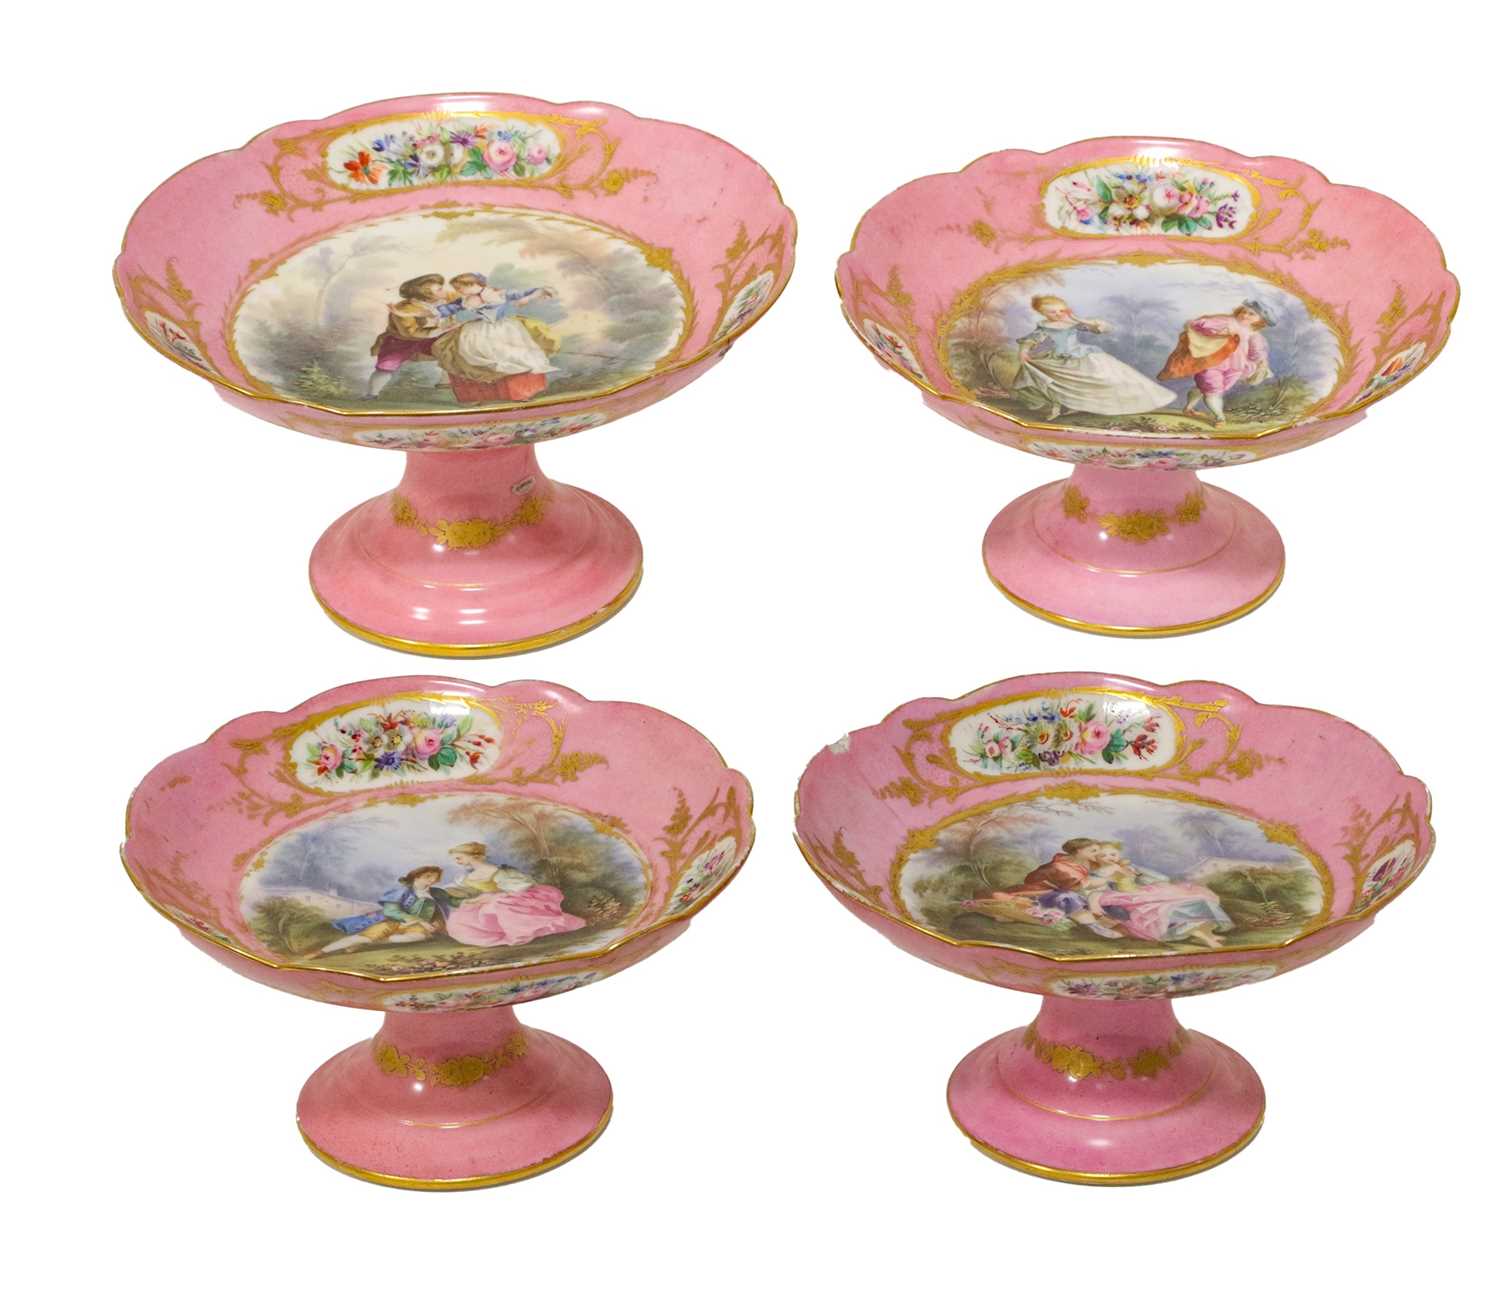 A Sevres-Style Porcelain Dessert Service, late 19th century, painted with Watteauesque figures in - Image 2 of 12